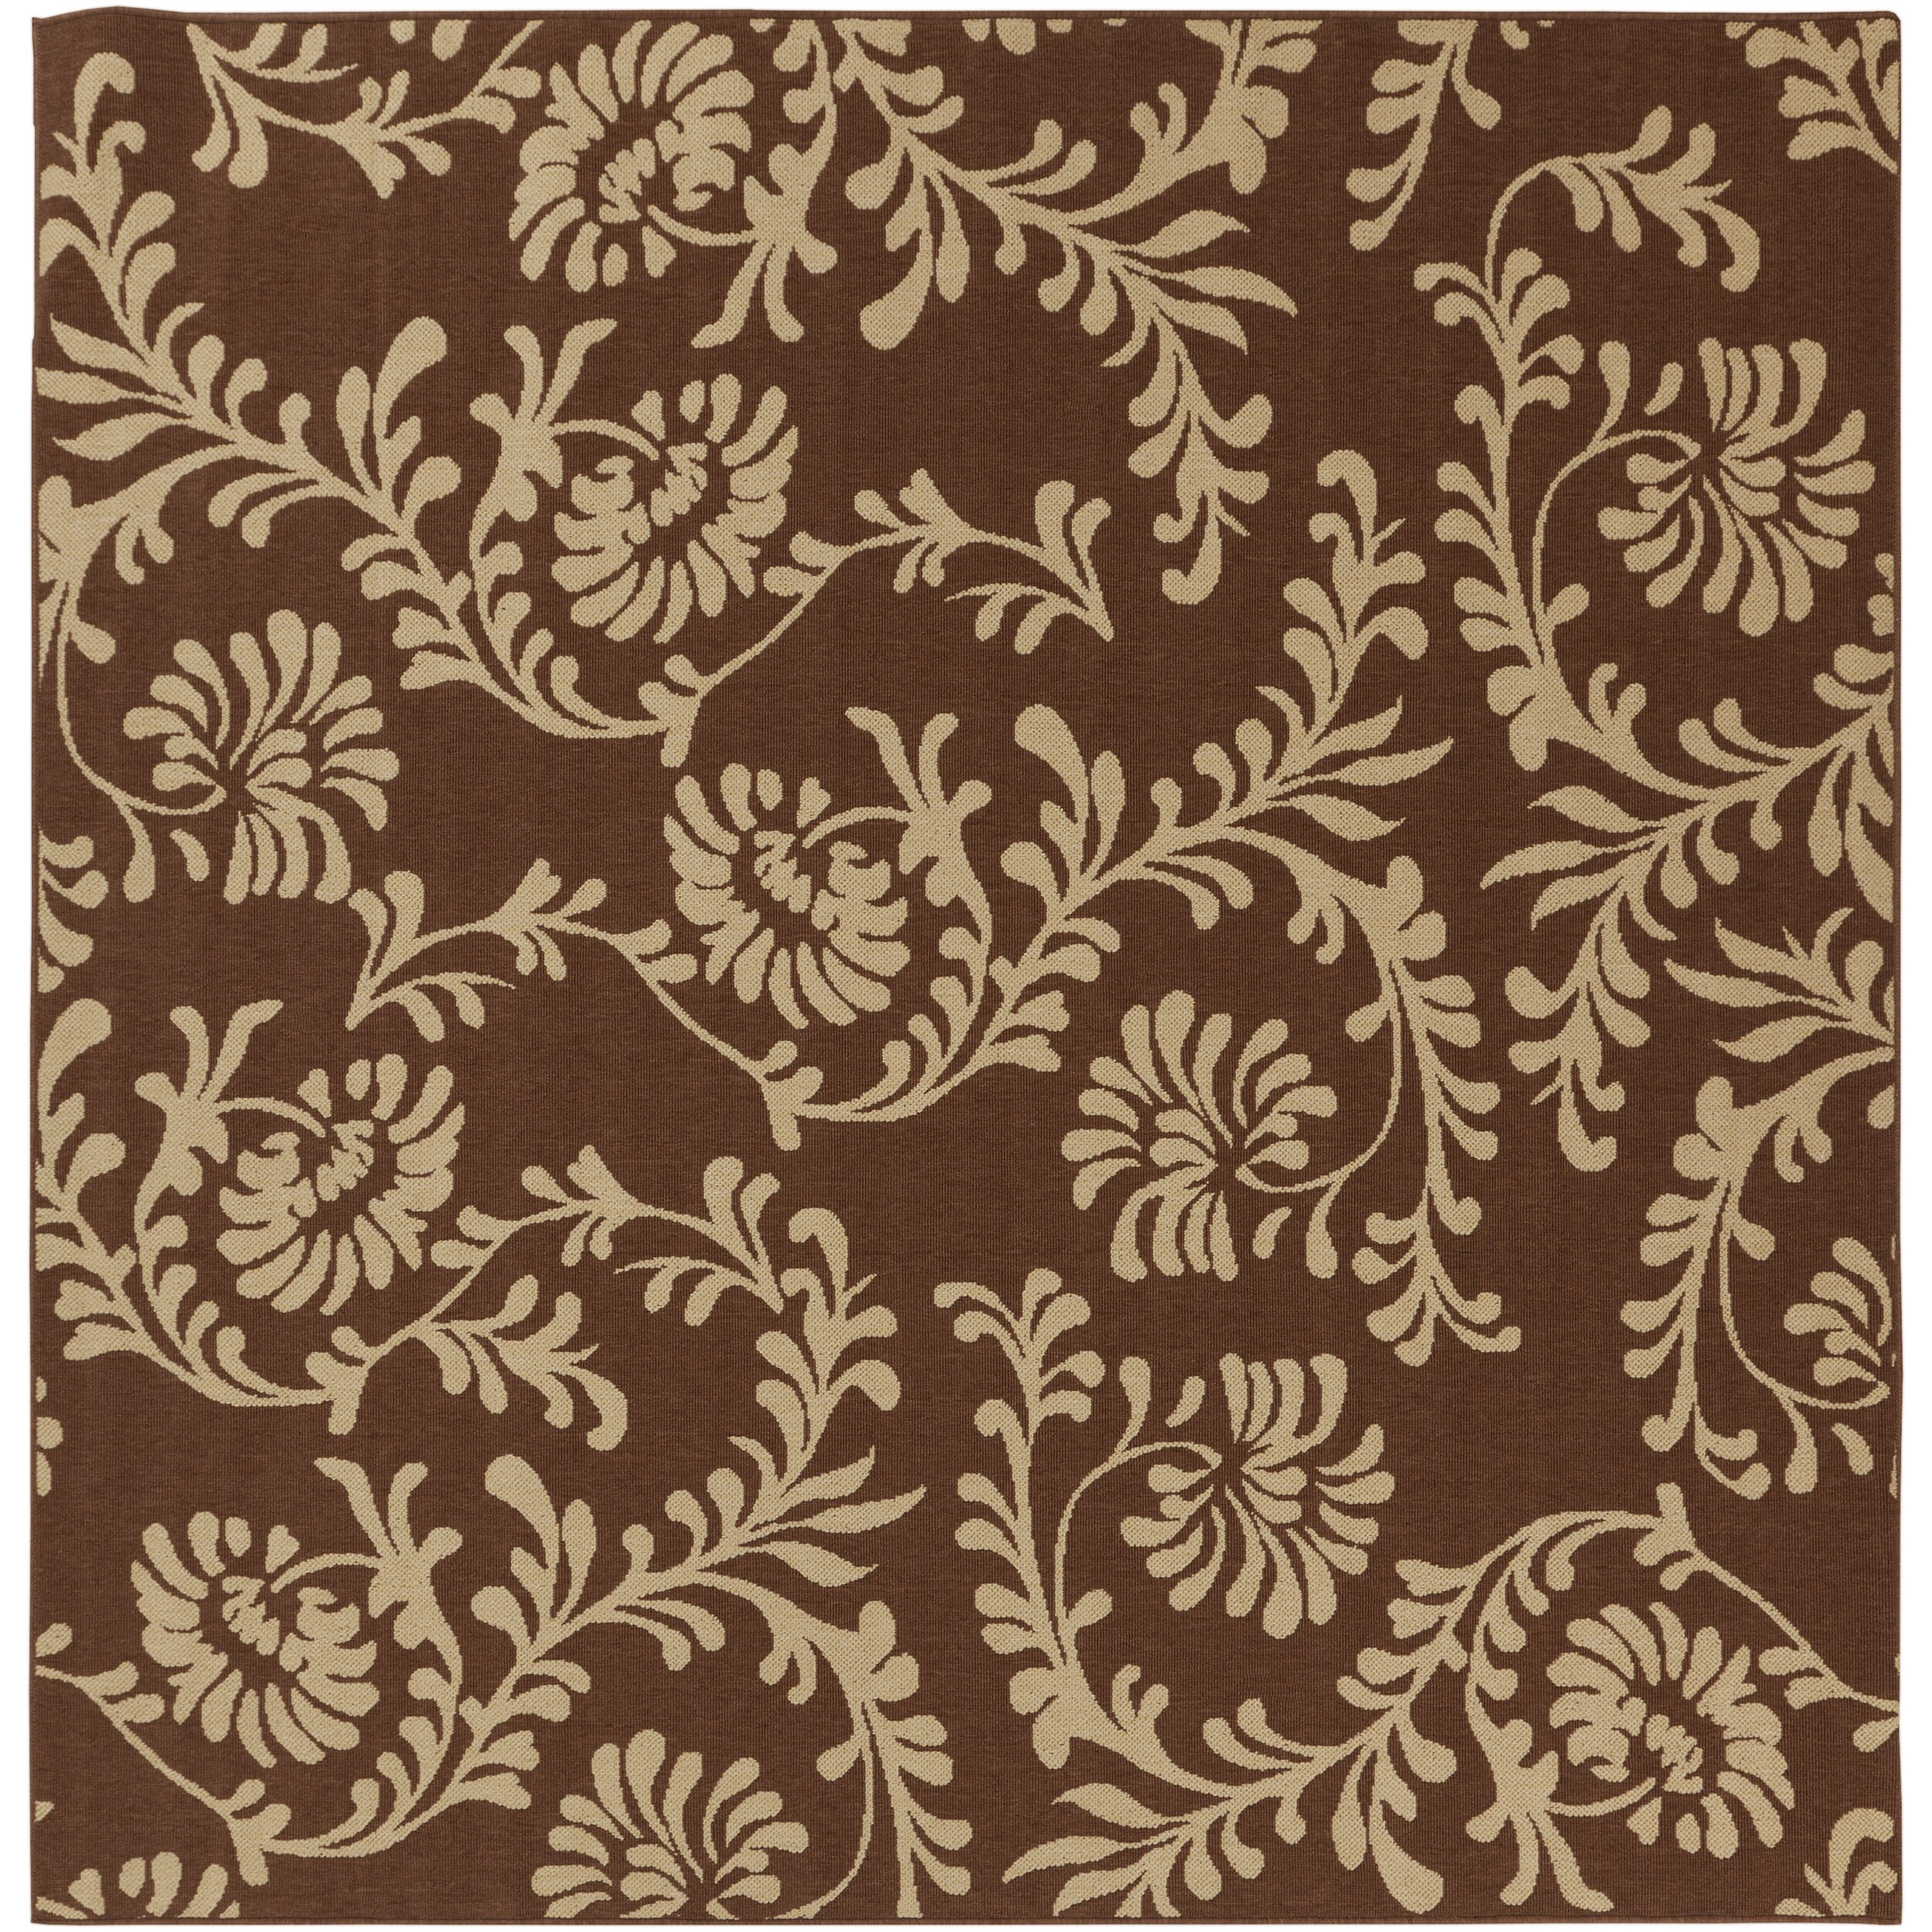 Piacenza Russet Floral Indoor/Outdoor Rug (7'3 x 7'3) Surya Round/Oval/Square